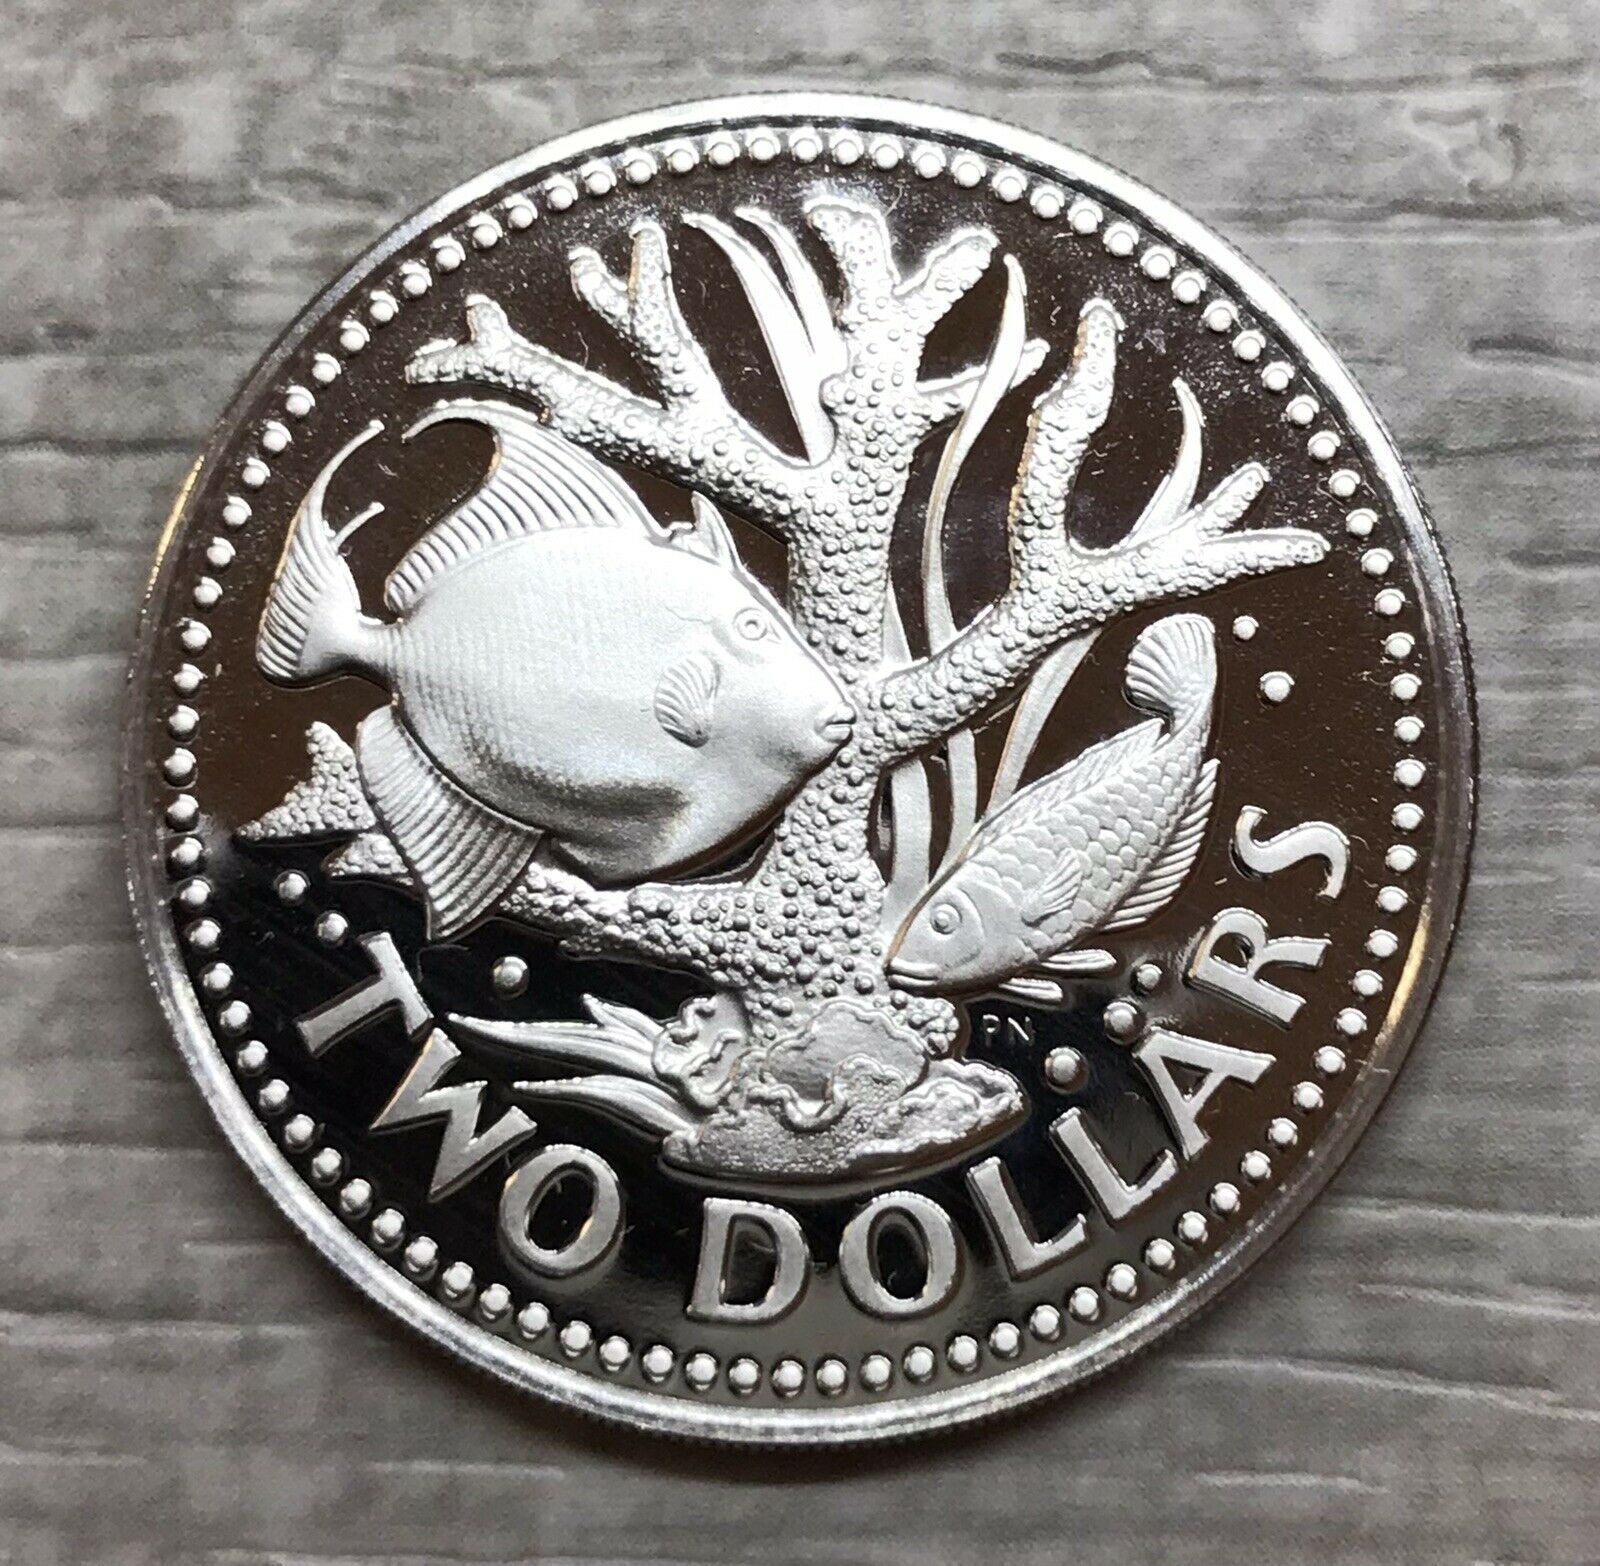 1980 Barbados $2 Dollars Coral Reef Fish Proof Coin (g159)